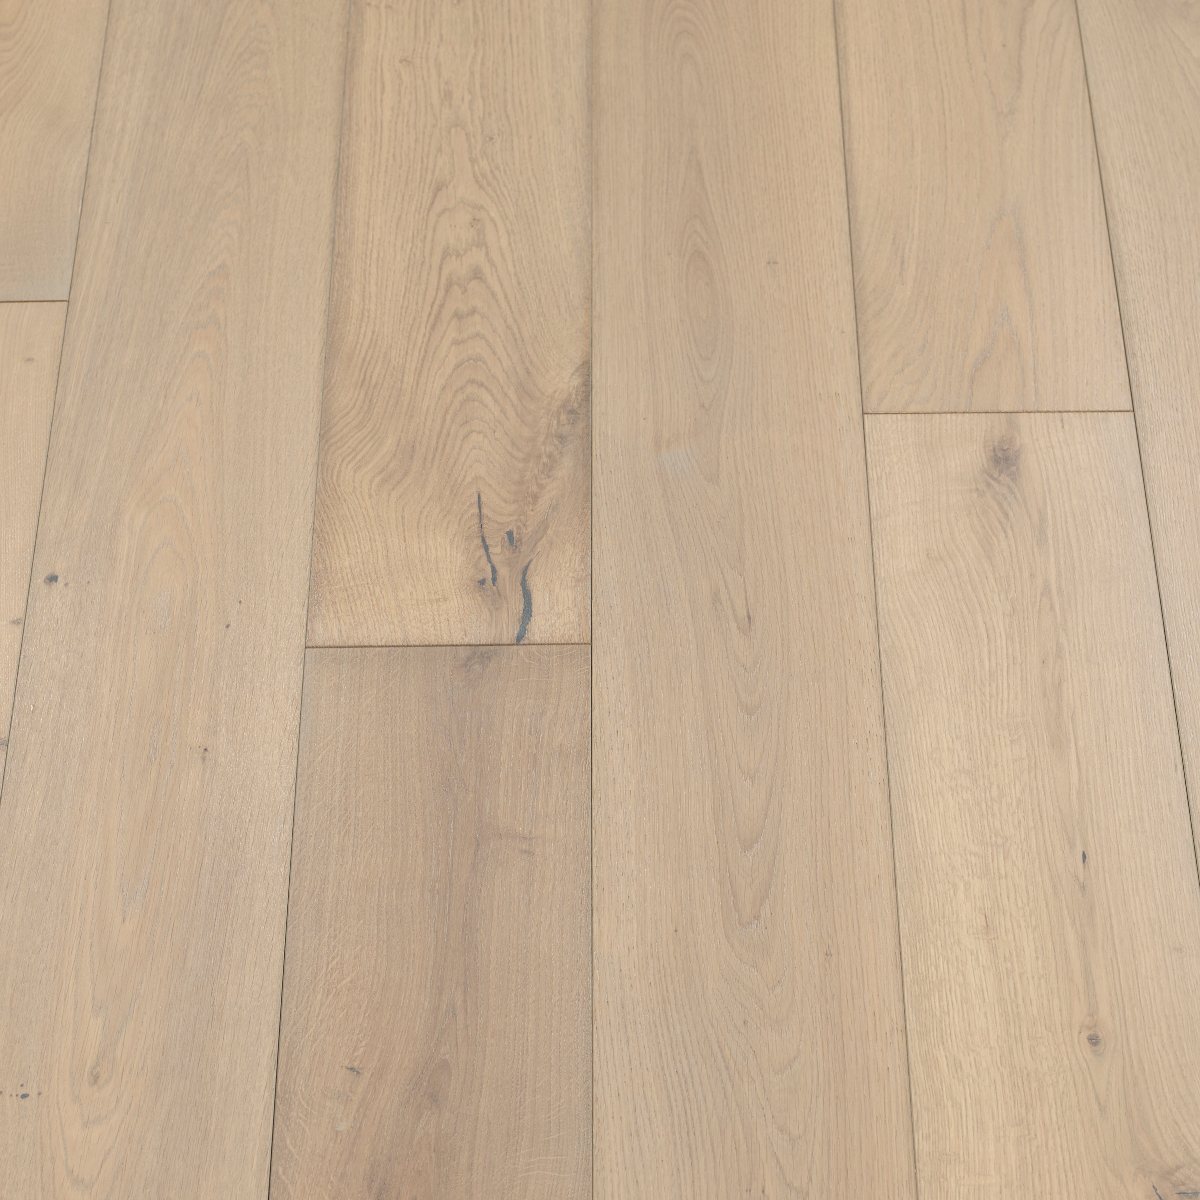 Classic Sand Woodflooring - image presenting a sandy-toned woodflooring with a light and airy appearance.